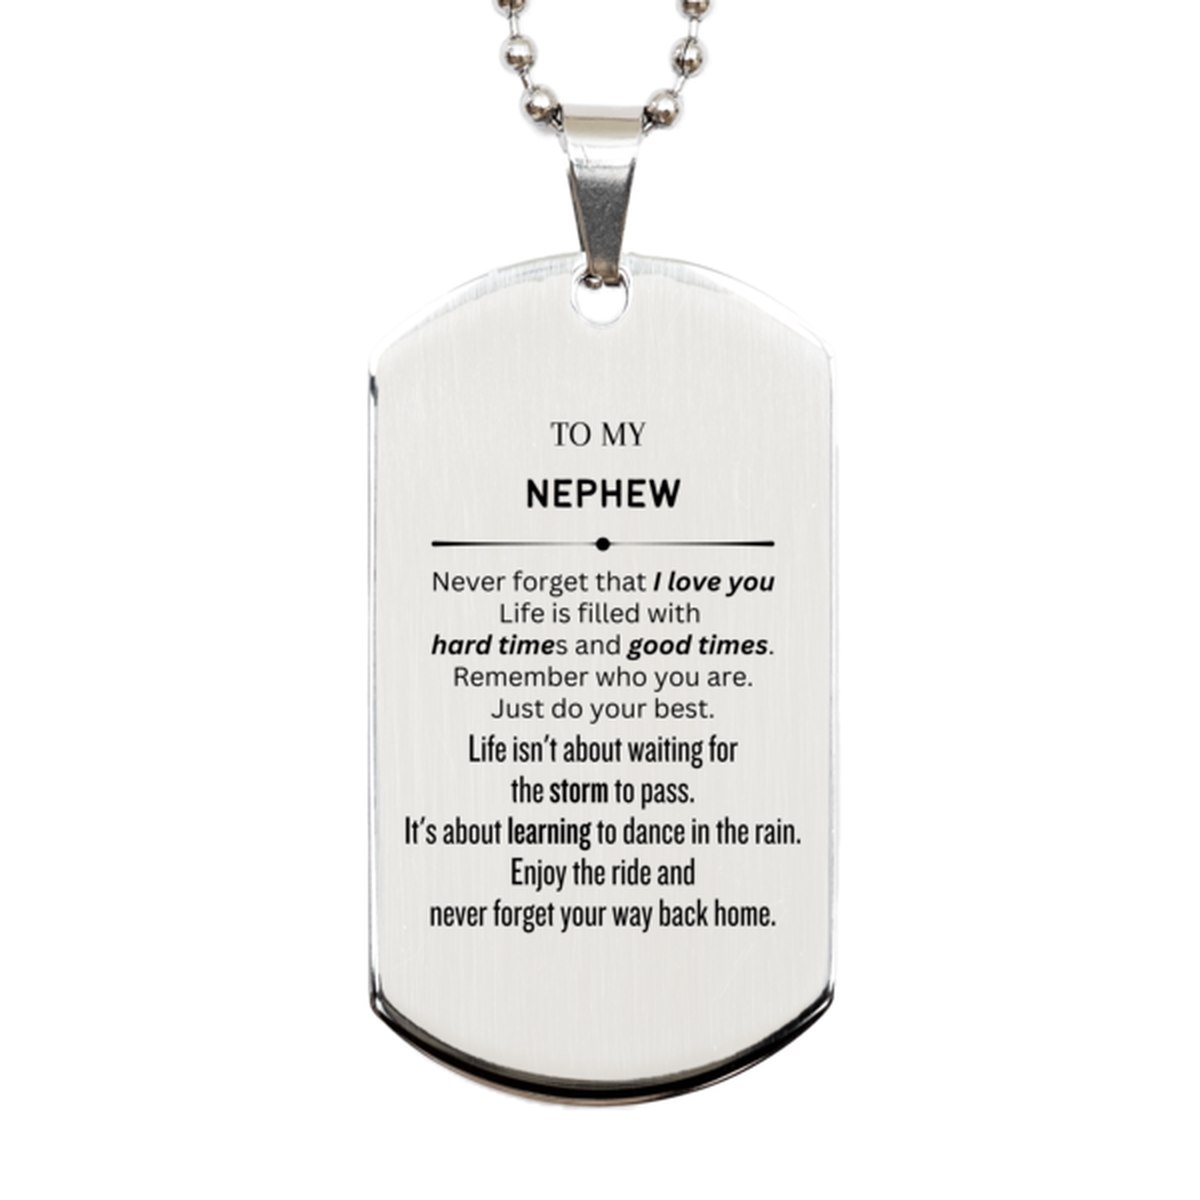 Christmas Nephew Silver Dog Tag Gifts, To My Nephew Birthday Thank You Gifts For Nephew, Graduation Unique Gifts For Nephew To My Nephew Never forget that I love you life is filled with hard times and good times. Remember who you are. Just do your best